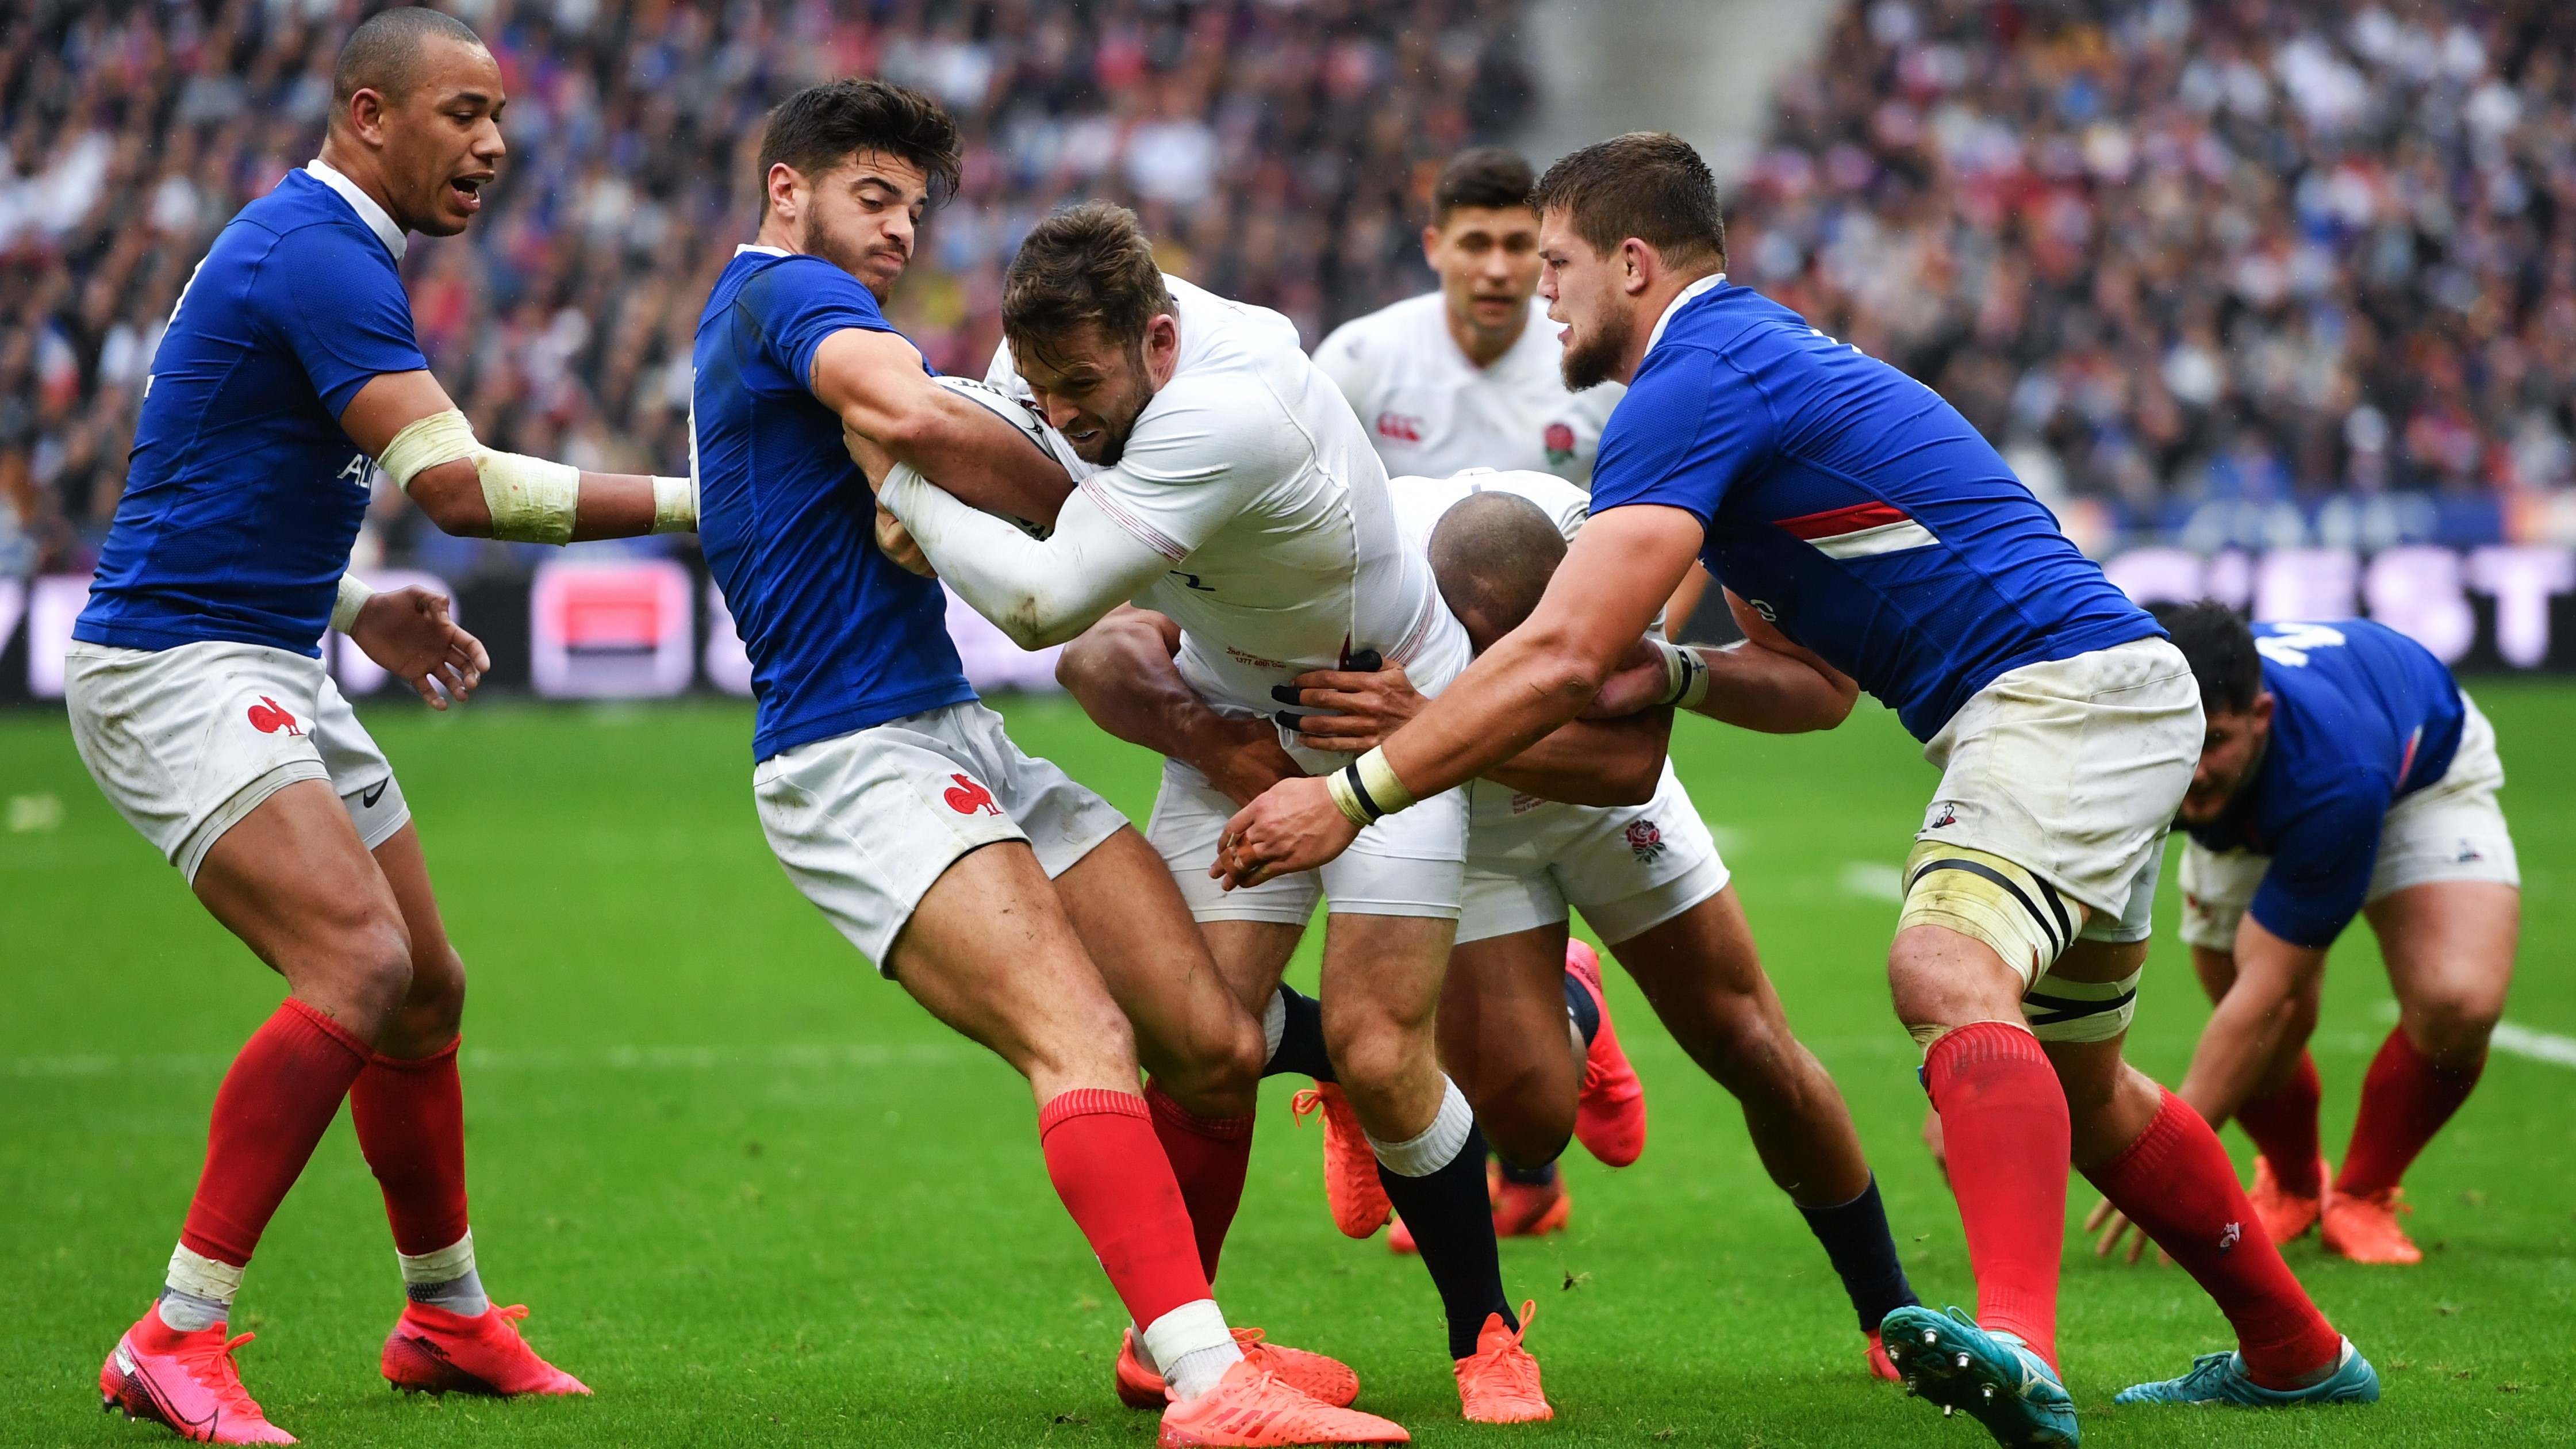 Autumn Nations Cup live stream how to watch every rugby match from anywhere TechRadar